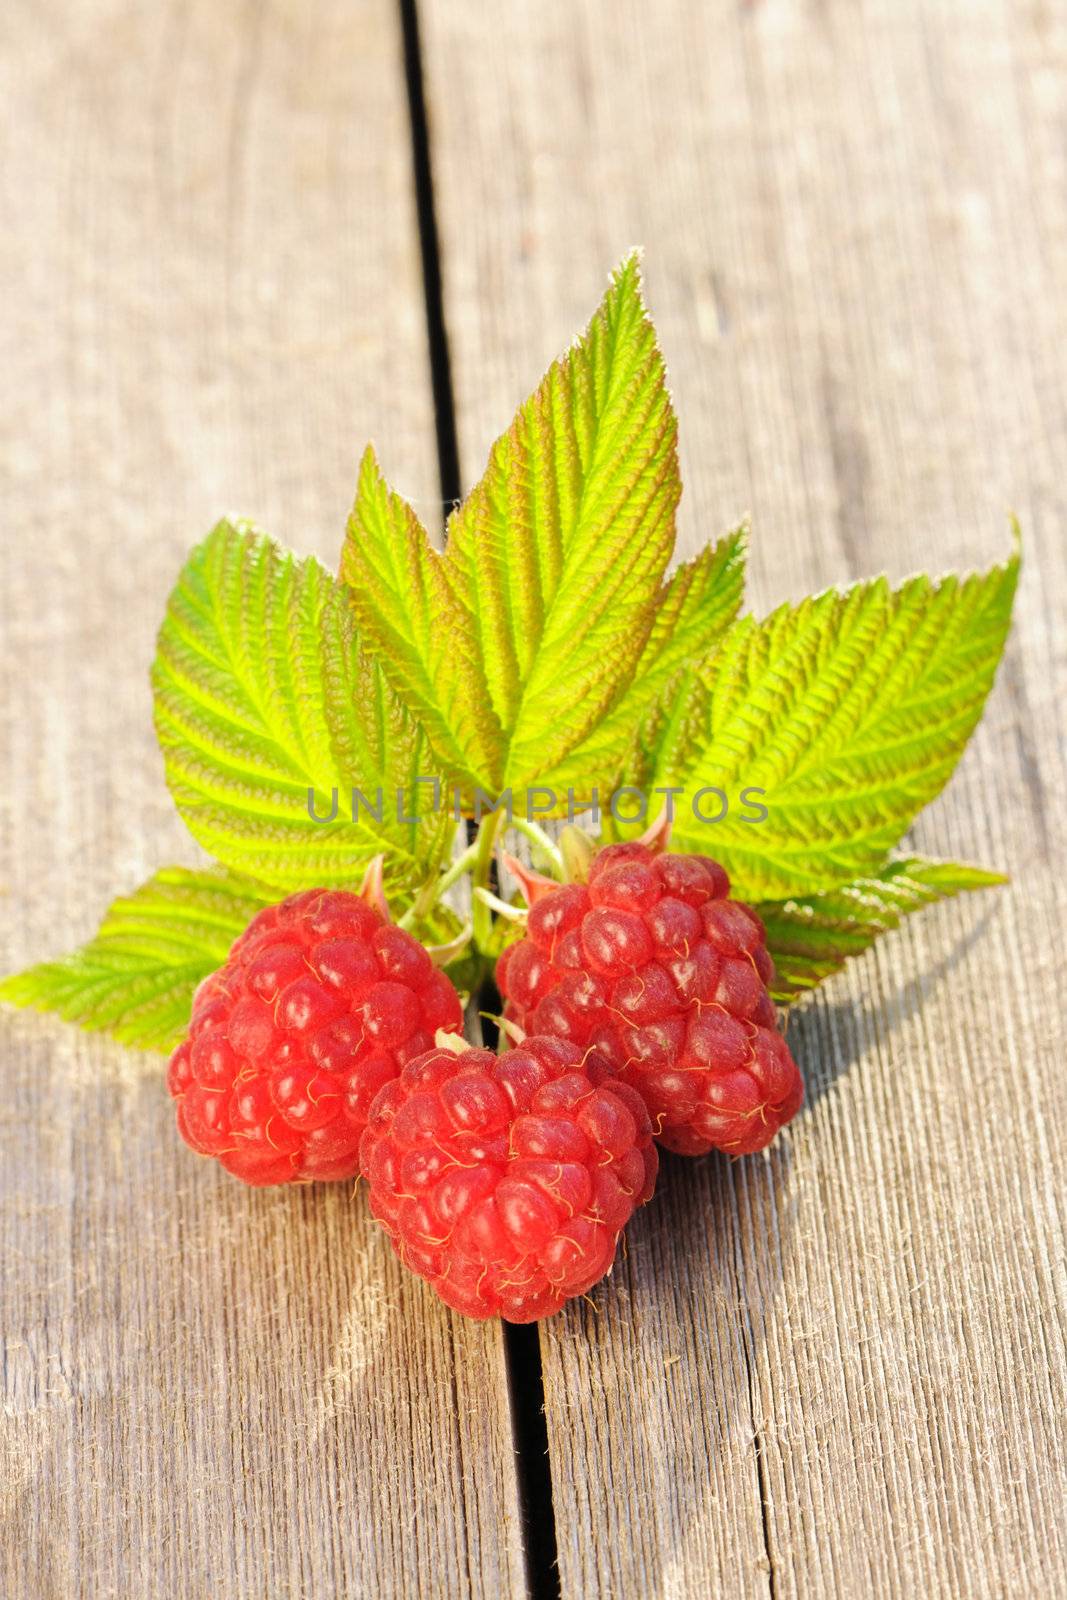 Raspberry with leafs on wooden table